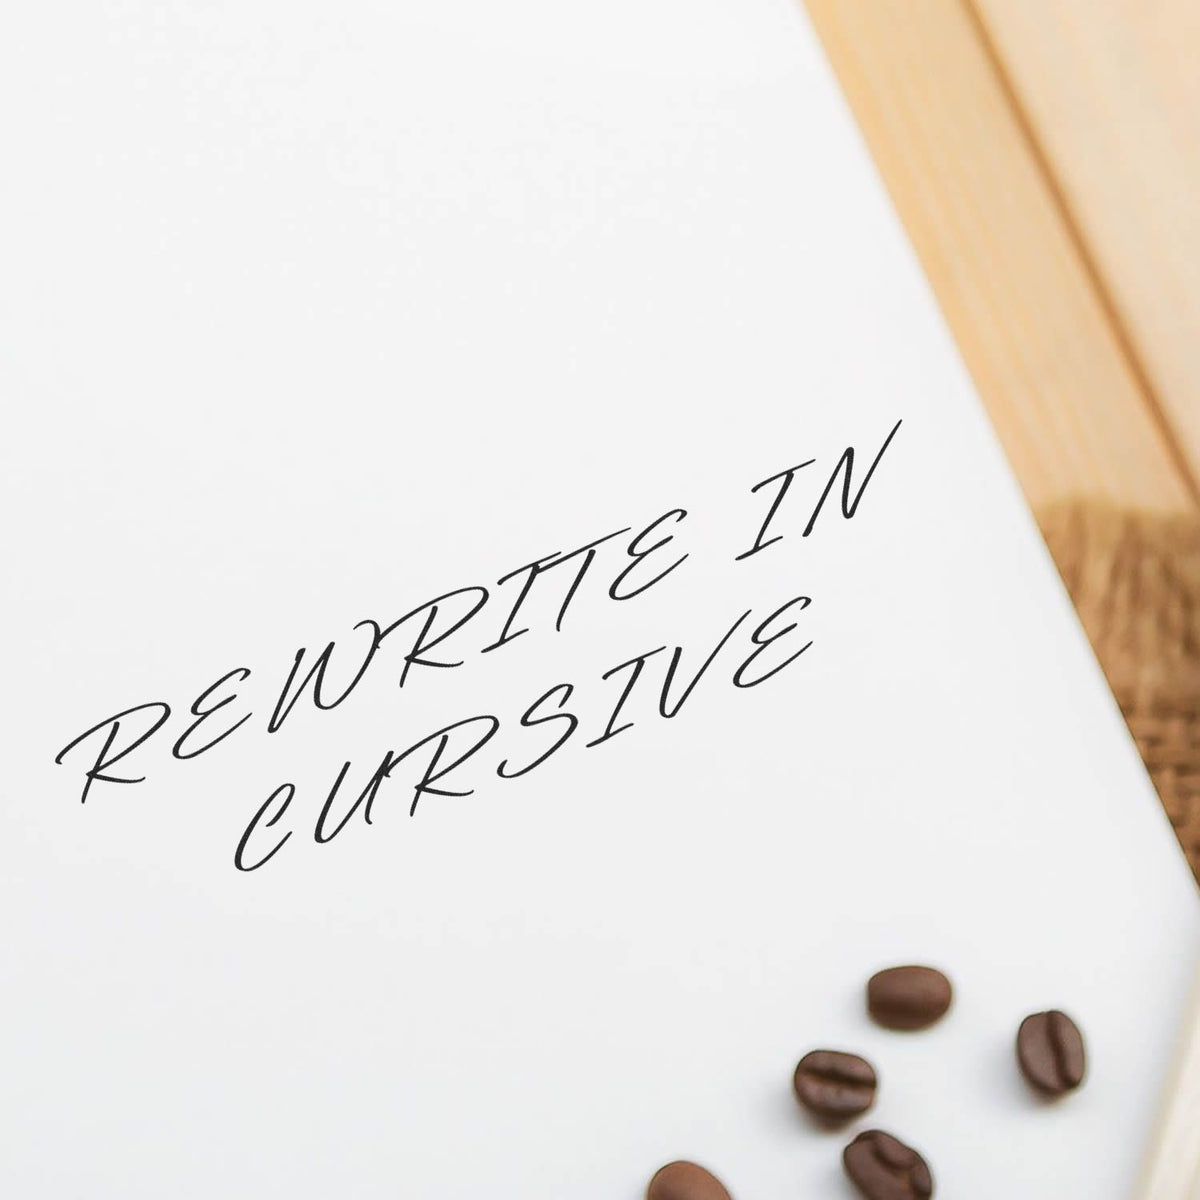 Large Rewrite In Cursive Rubber Stamp Lifestyle Photo